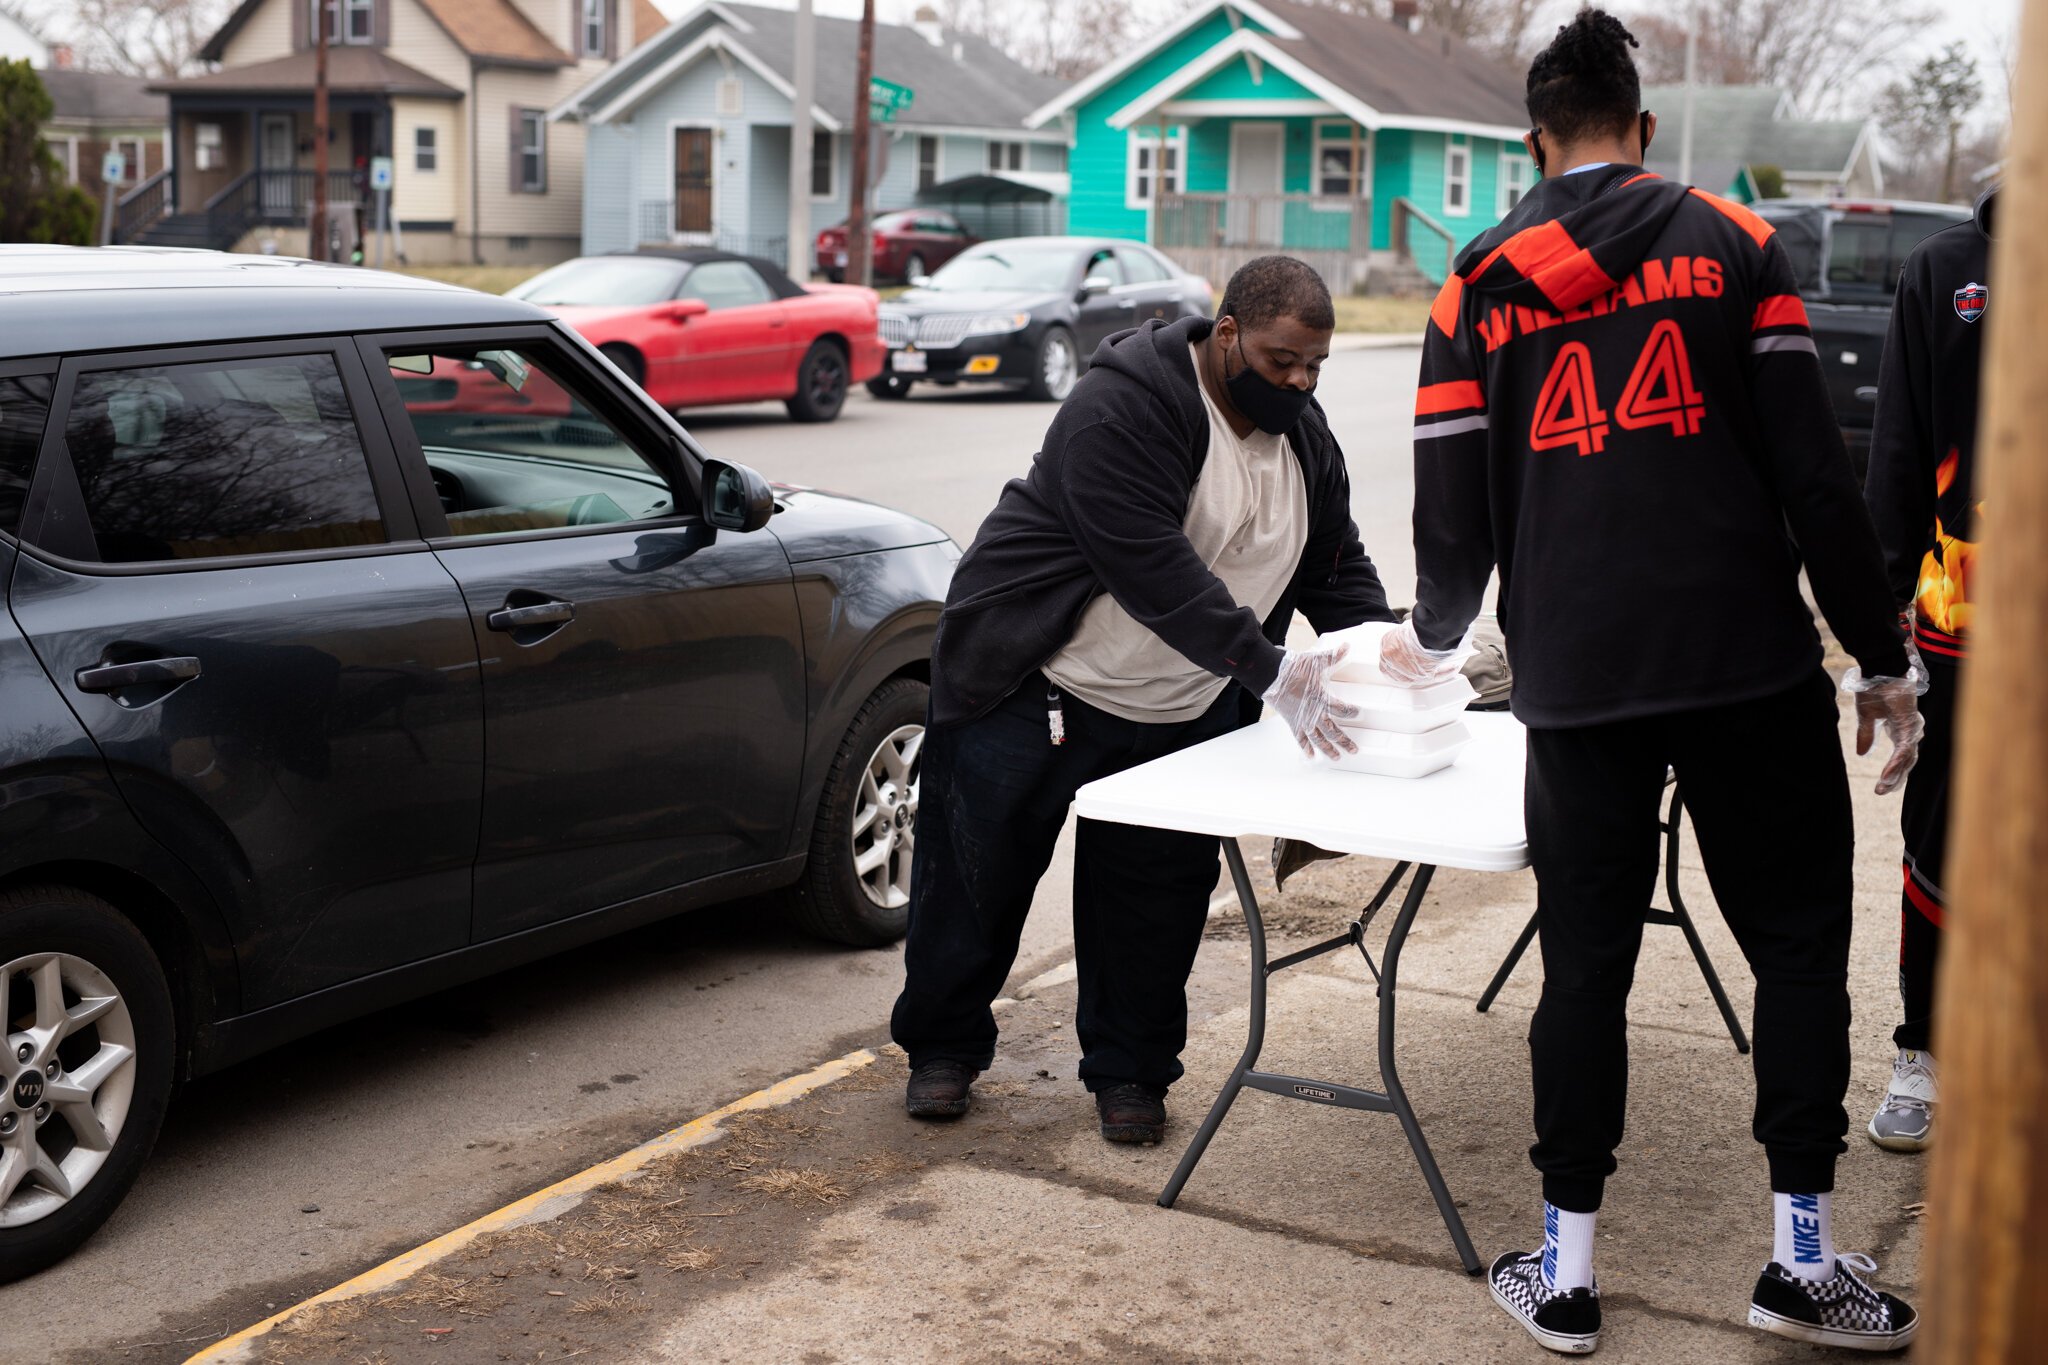 During the pandemic, Southeast nonprofits and supporters have been hosting Curbside BBQs to build community and feed hungry people in a safe, socially distant way.